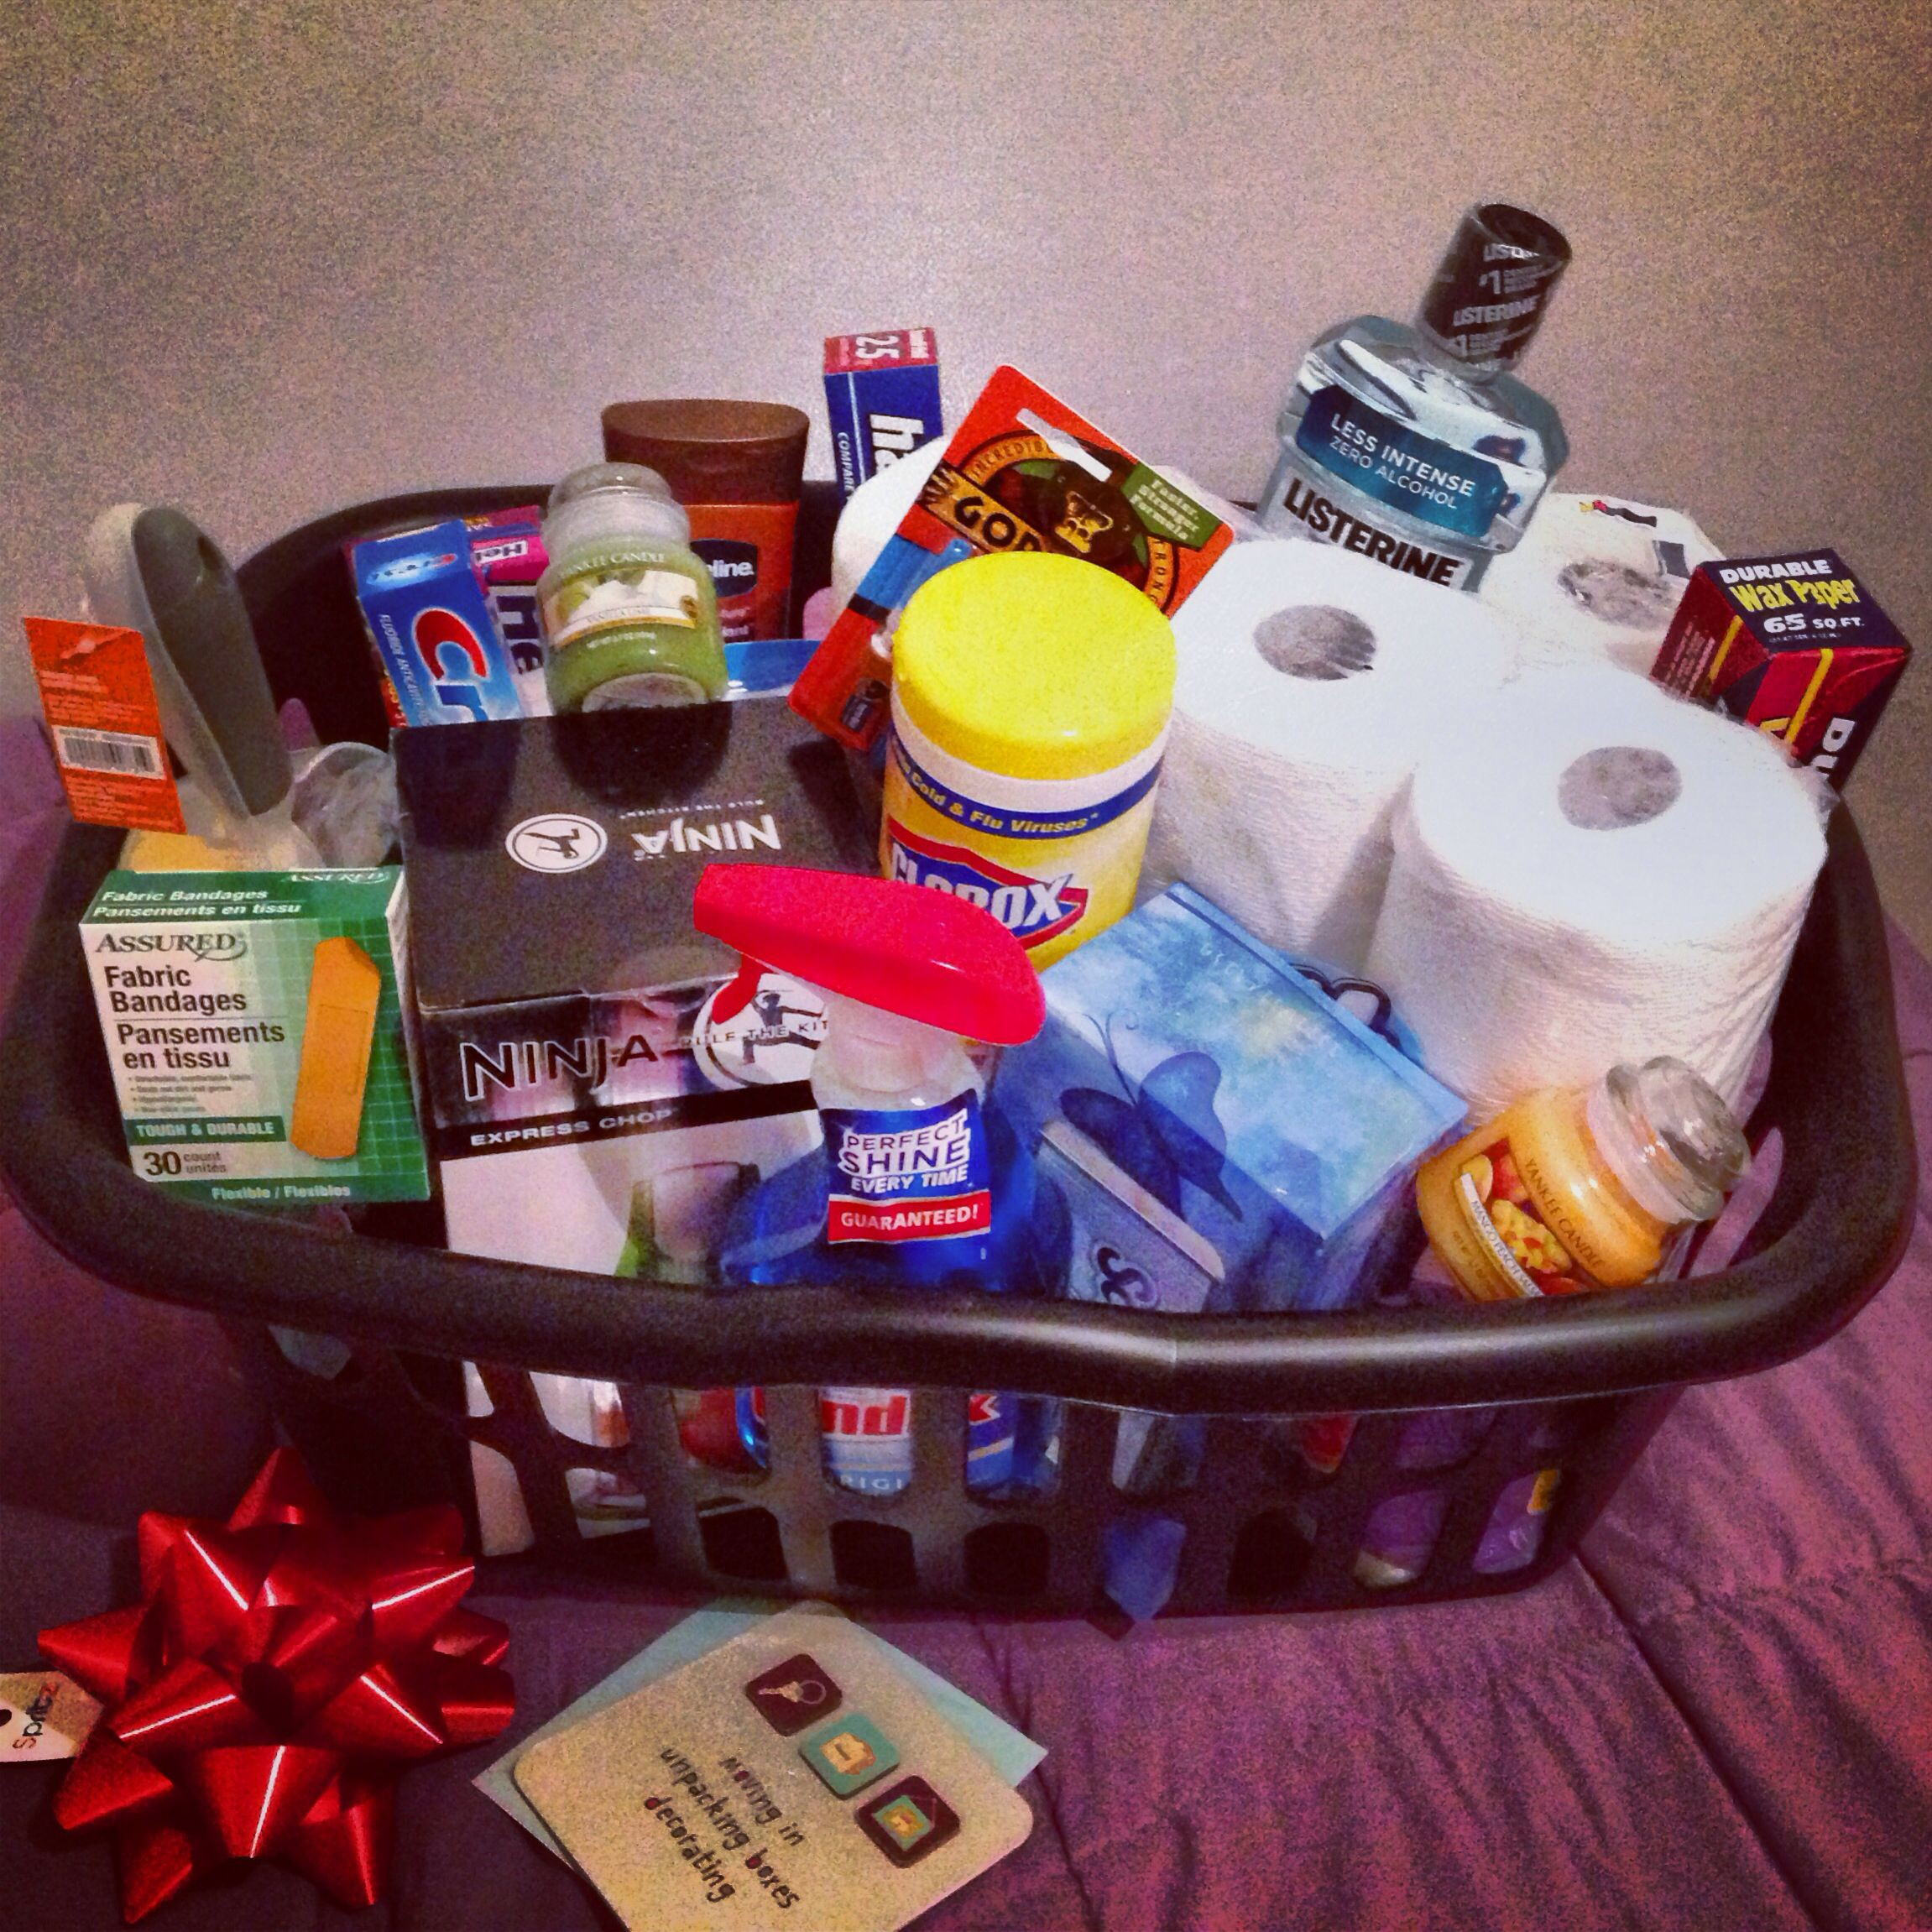 New Home Gift Basket Ideas
 DIY Housewarming t basket include household necessities like cleaning supplies toilet